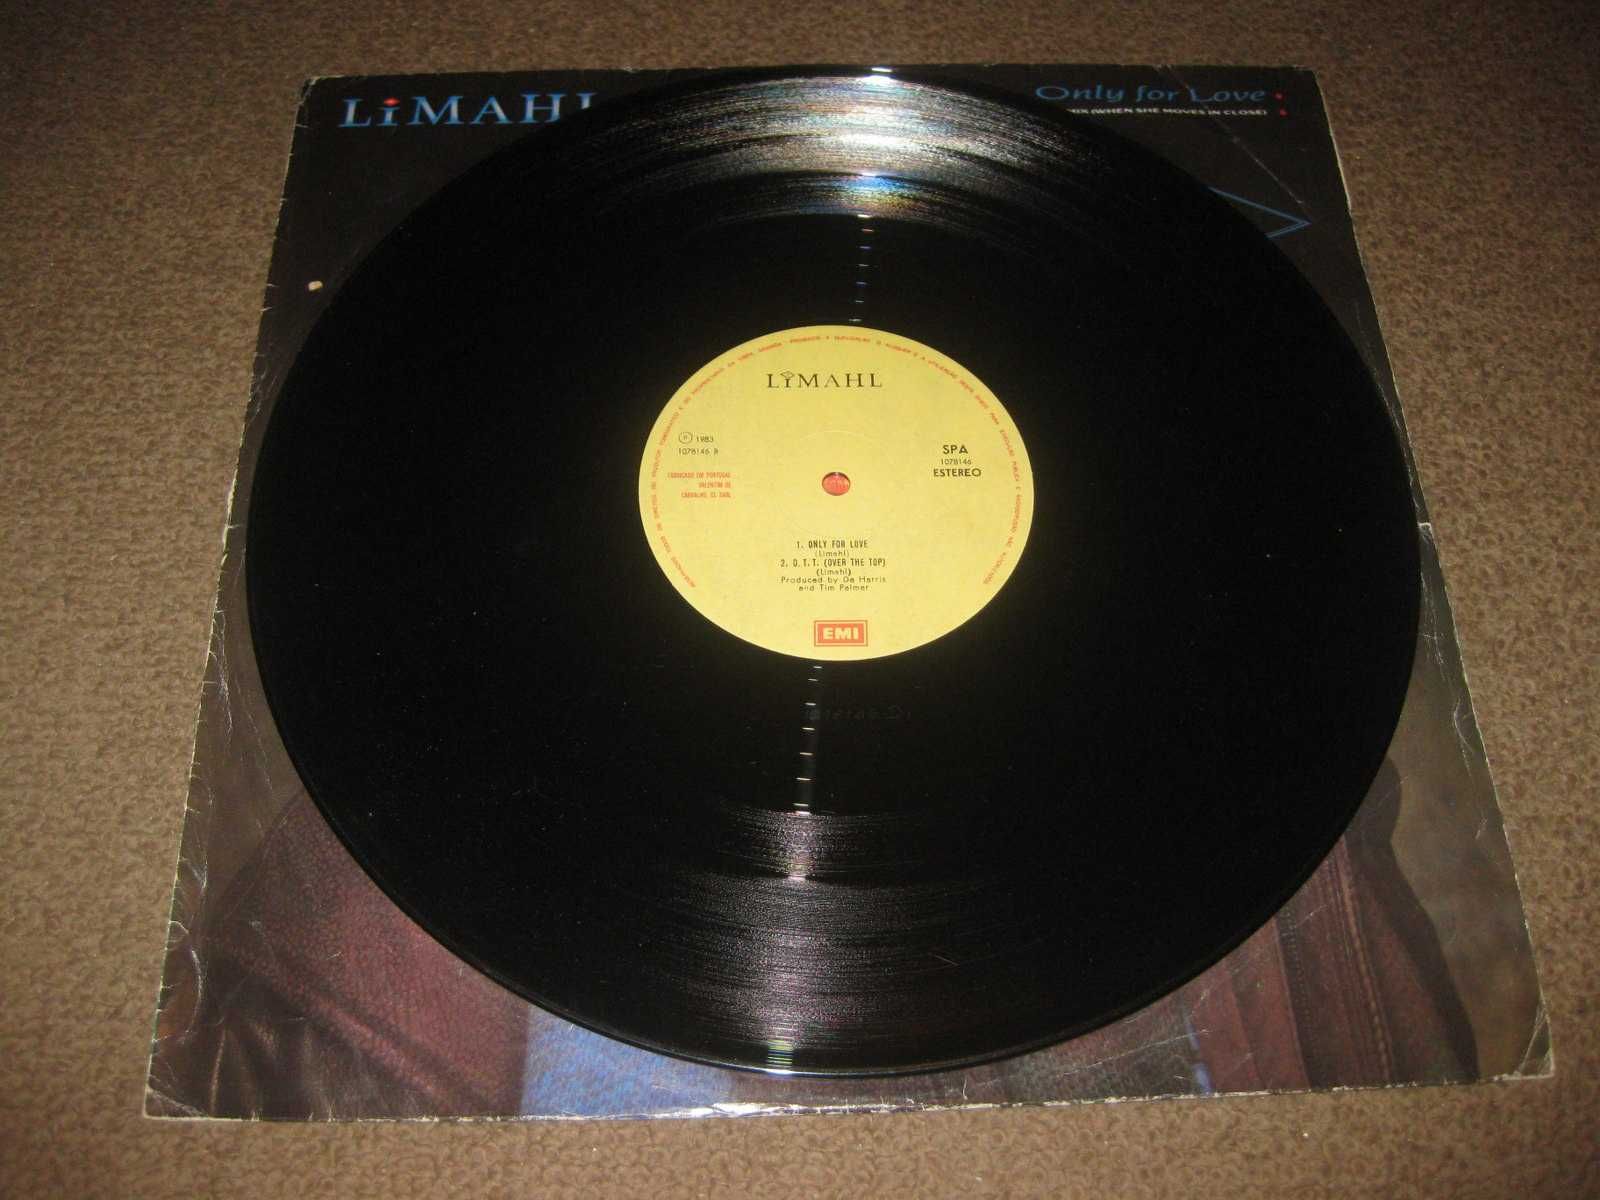 Vinil Maxi Single 45 rpm do Limahl "Only For Love"